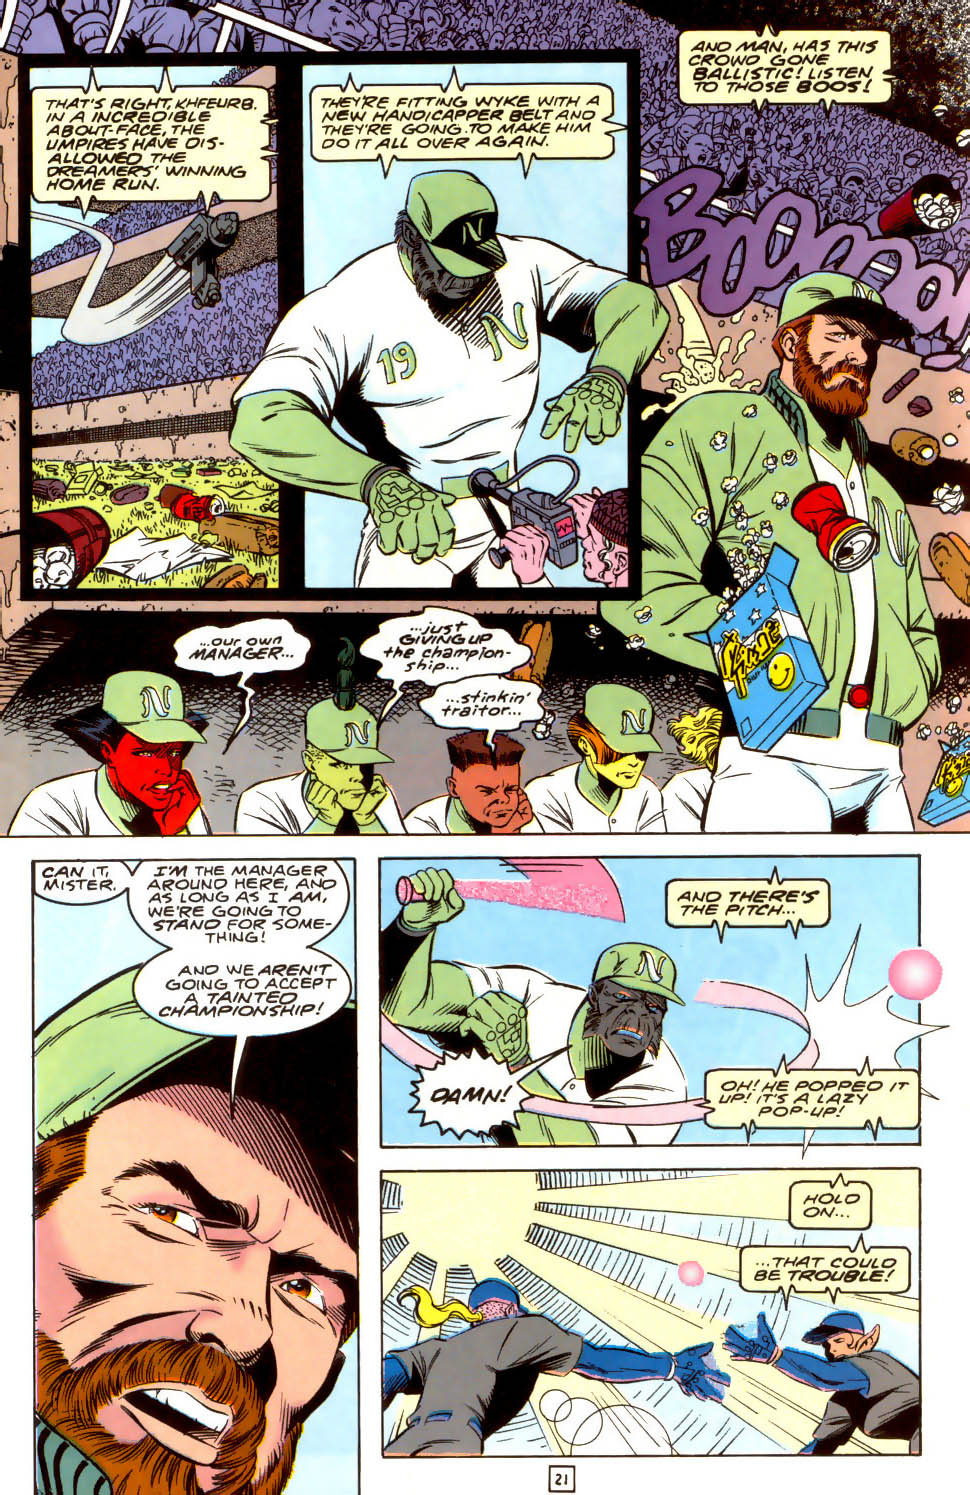 Legion of Super-Heroes (1989) 37 Page 21